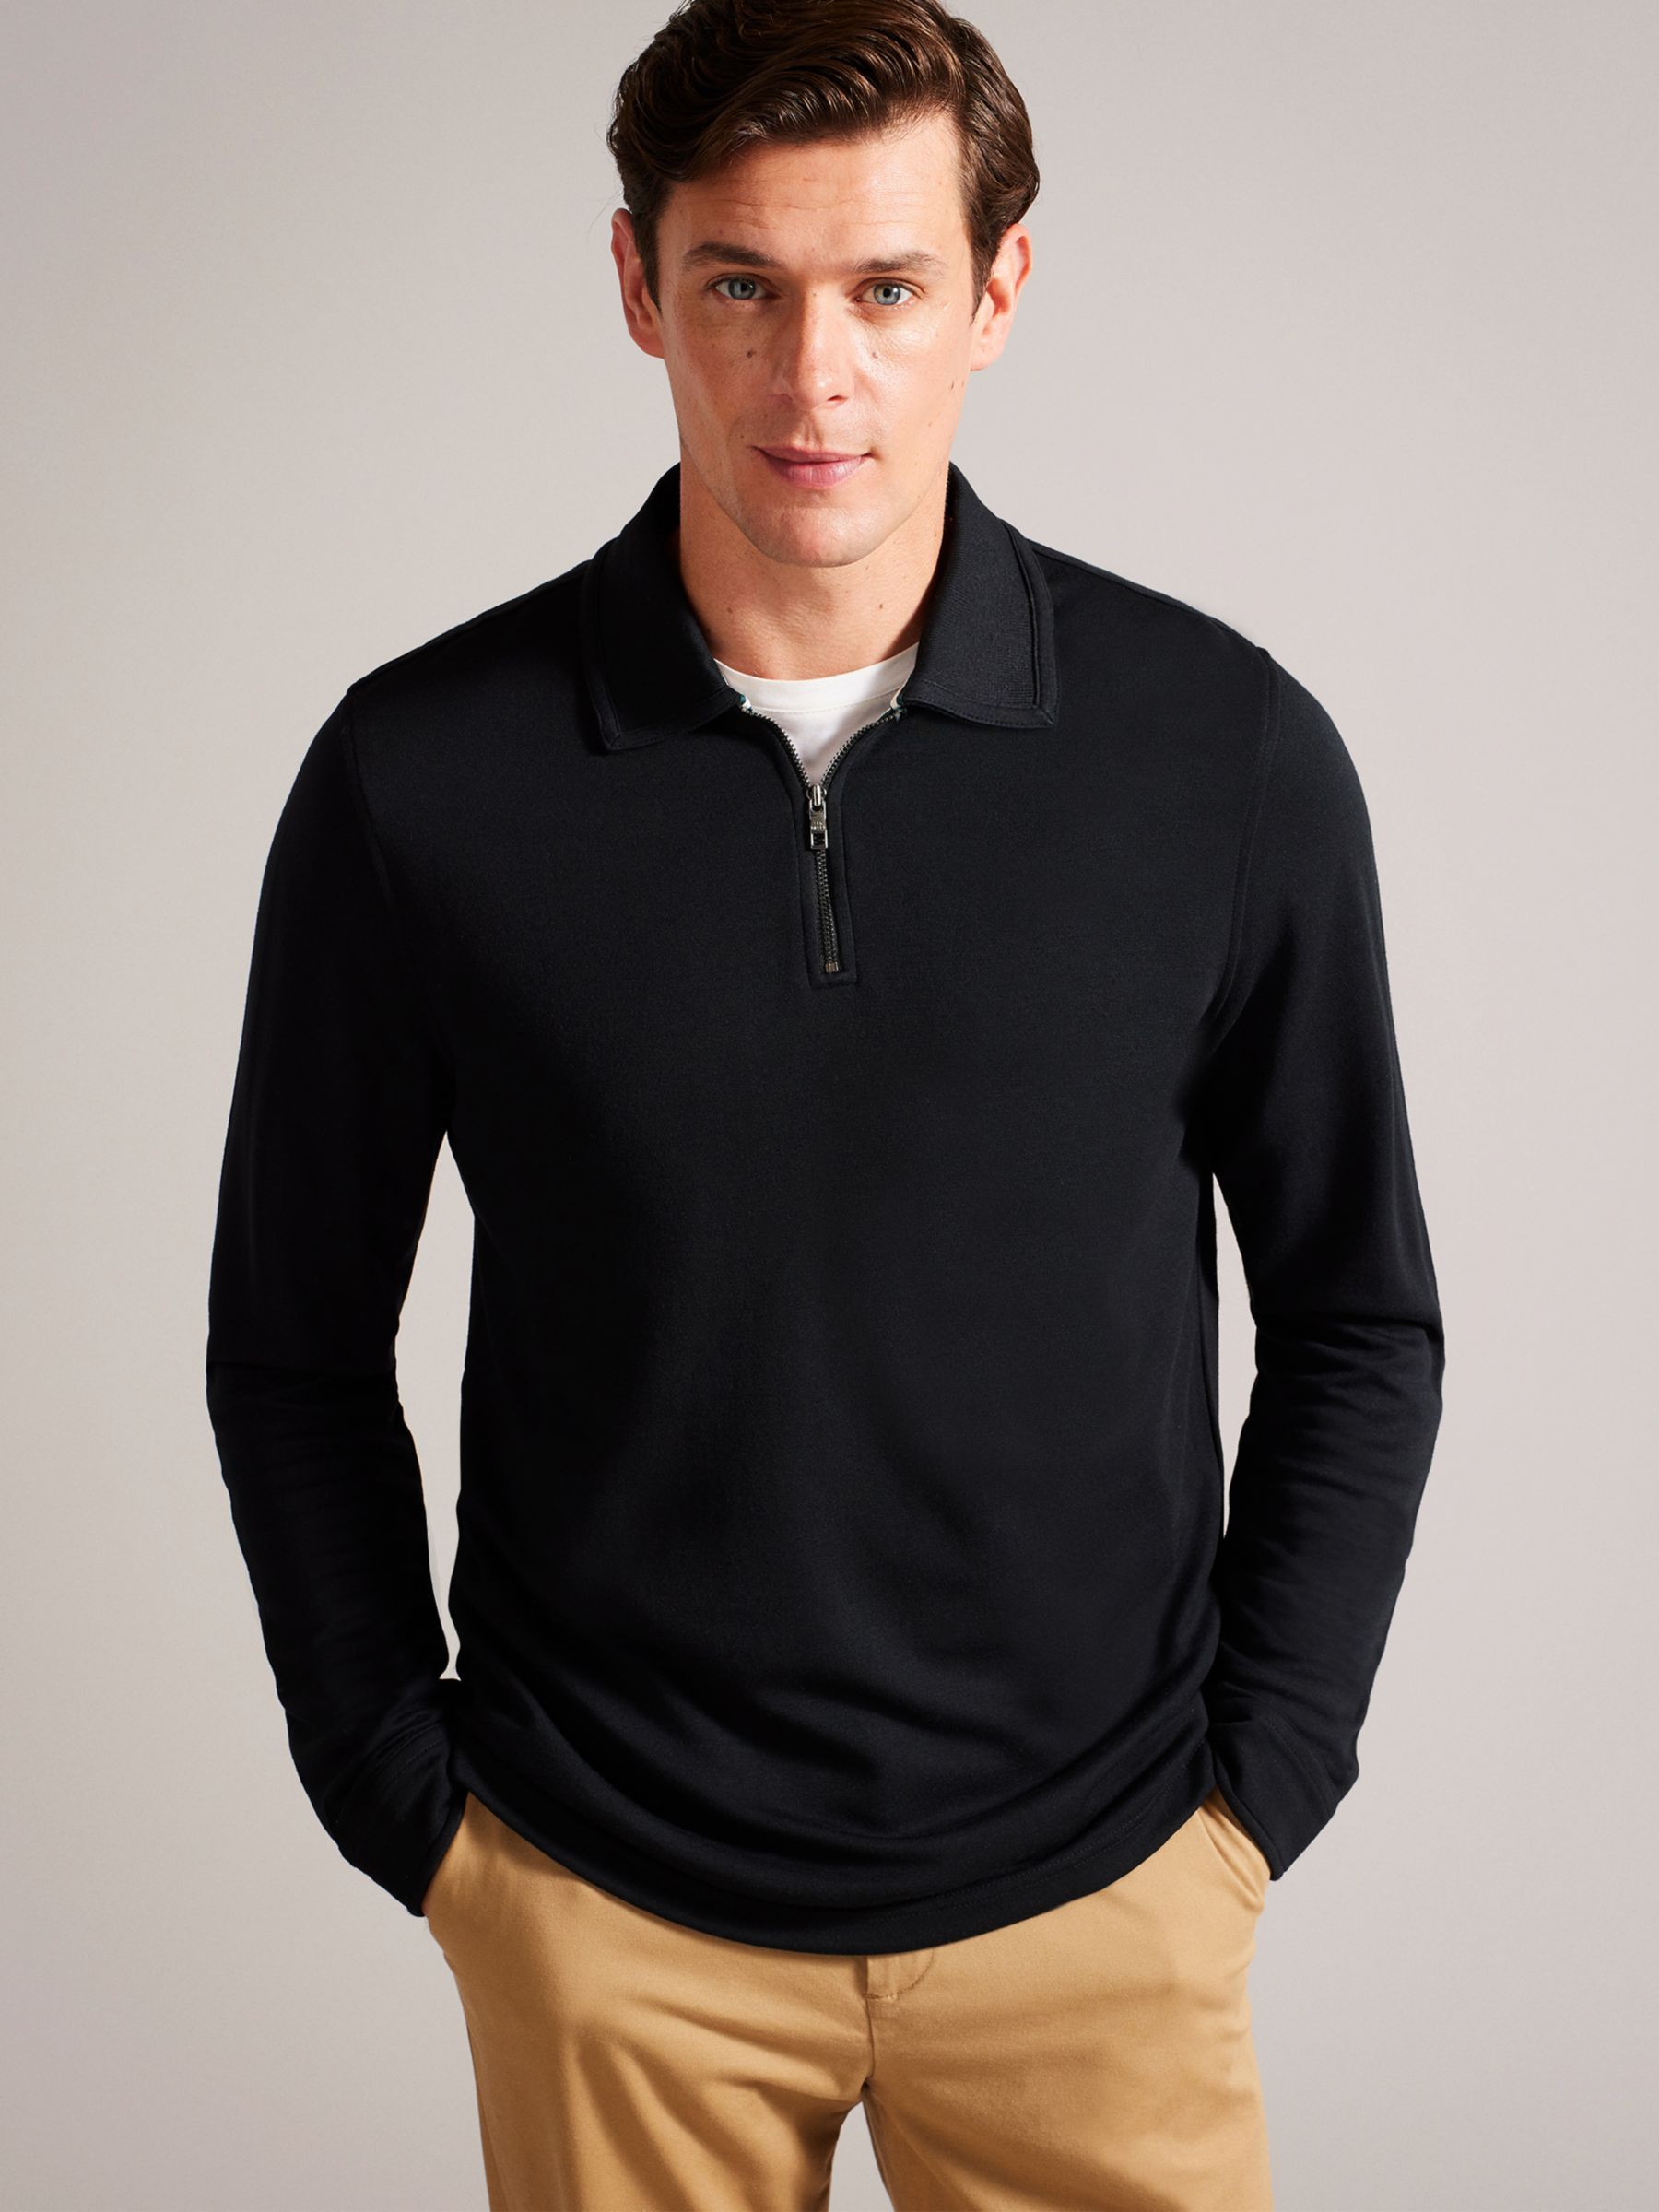 Ted Baker Karpol Long Sleeve Soft Touch Polo Top, Black at John Lewis ...